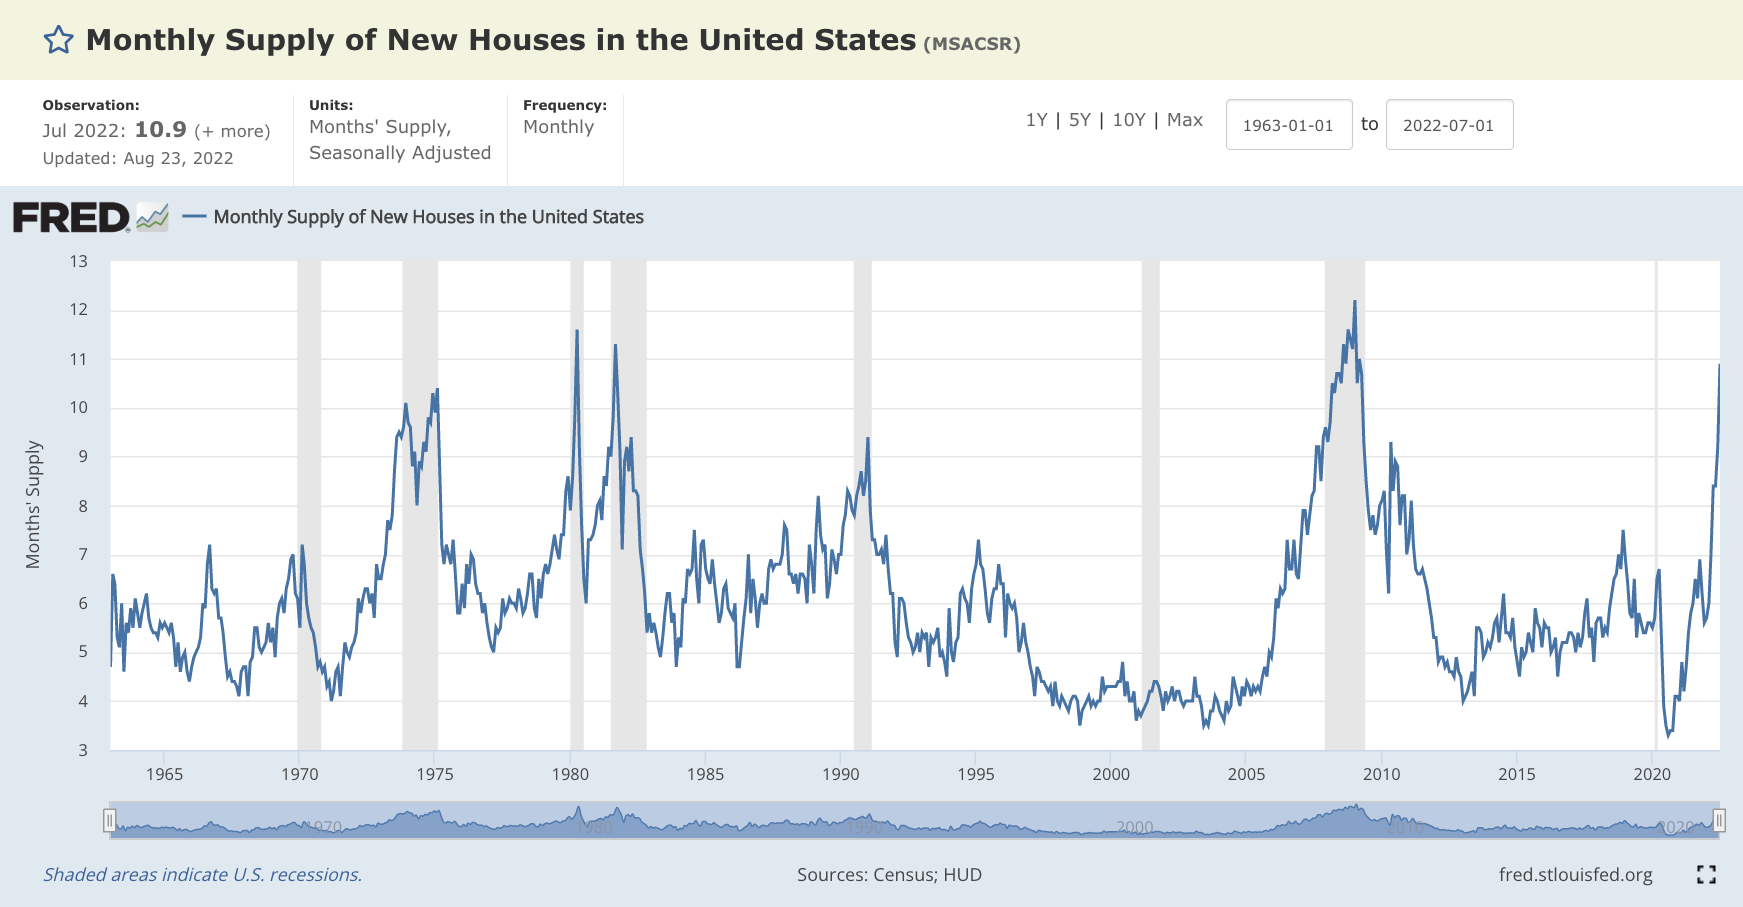 Monthly Supply of Houses in the United States (MSACSR)